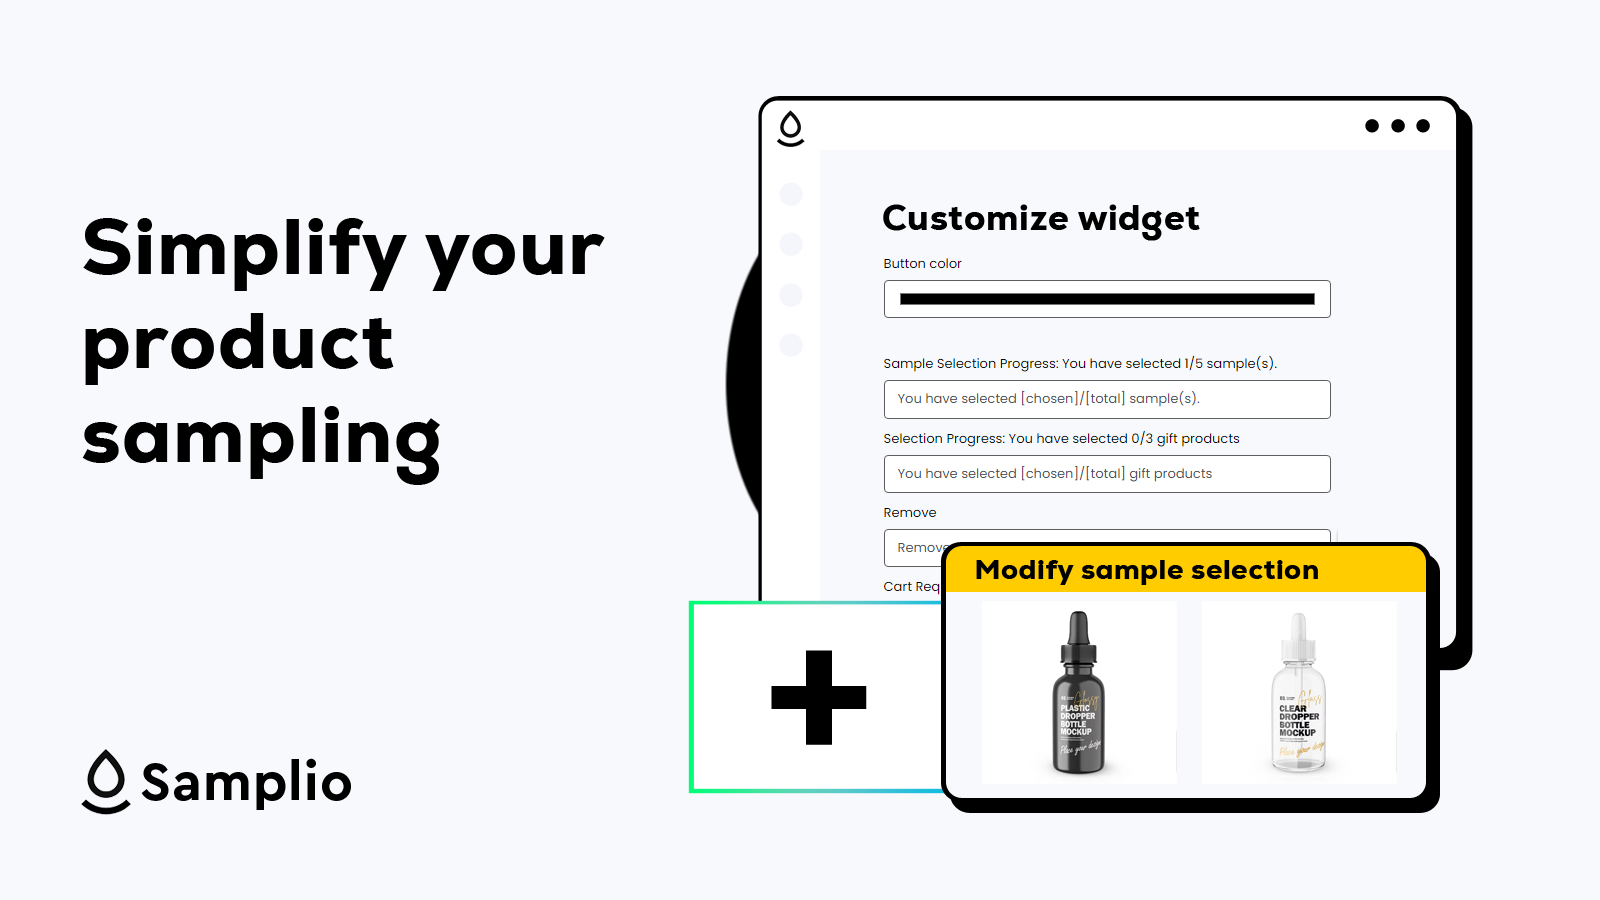 Simplify your product sampling